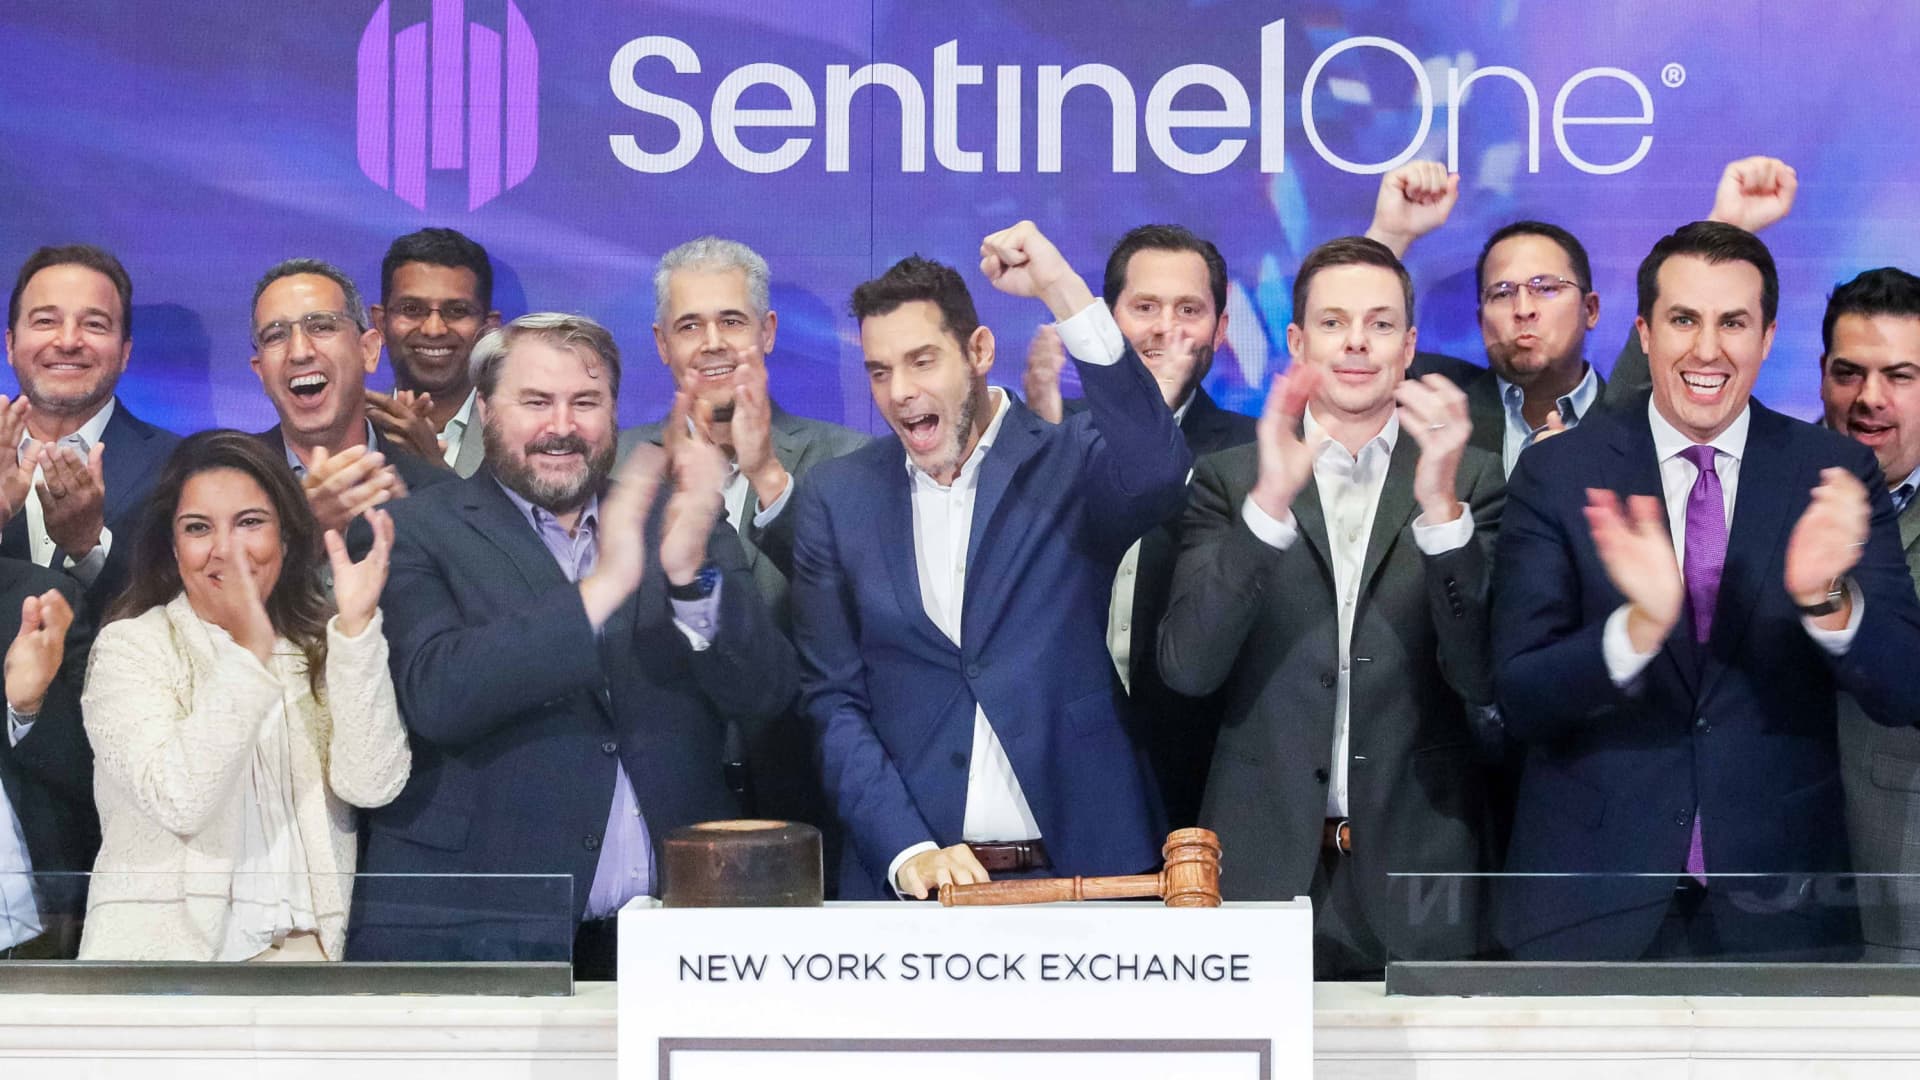 SentinelOne CEO says the cybersecurity business is not for sale